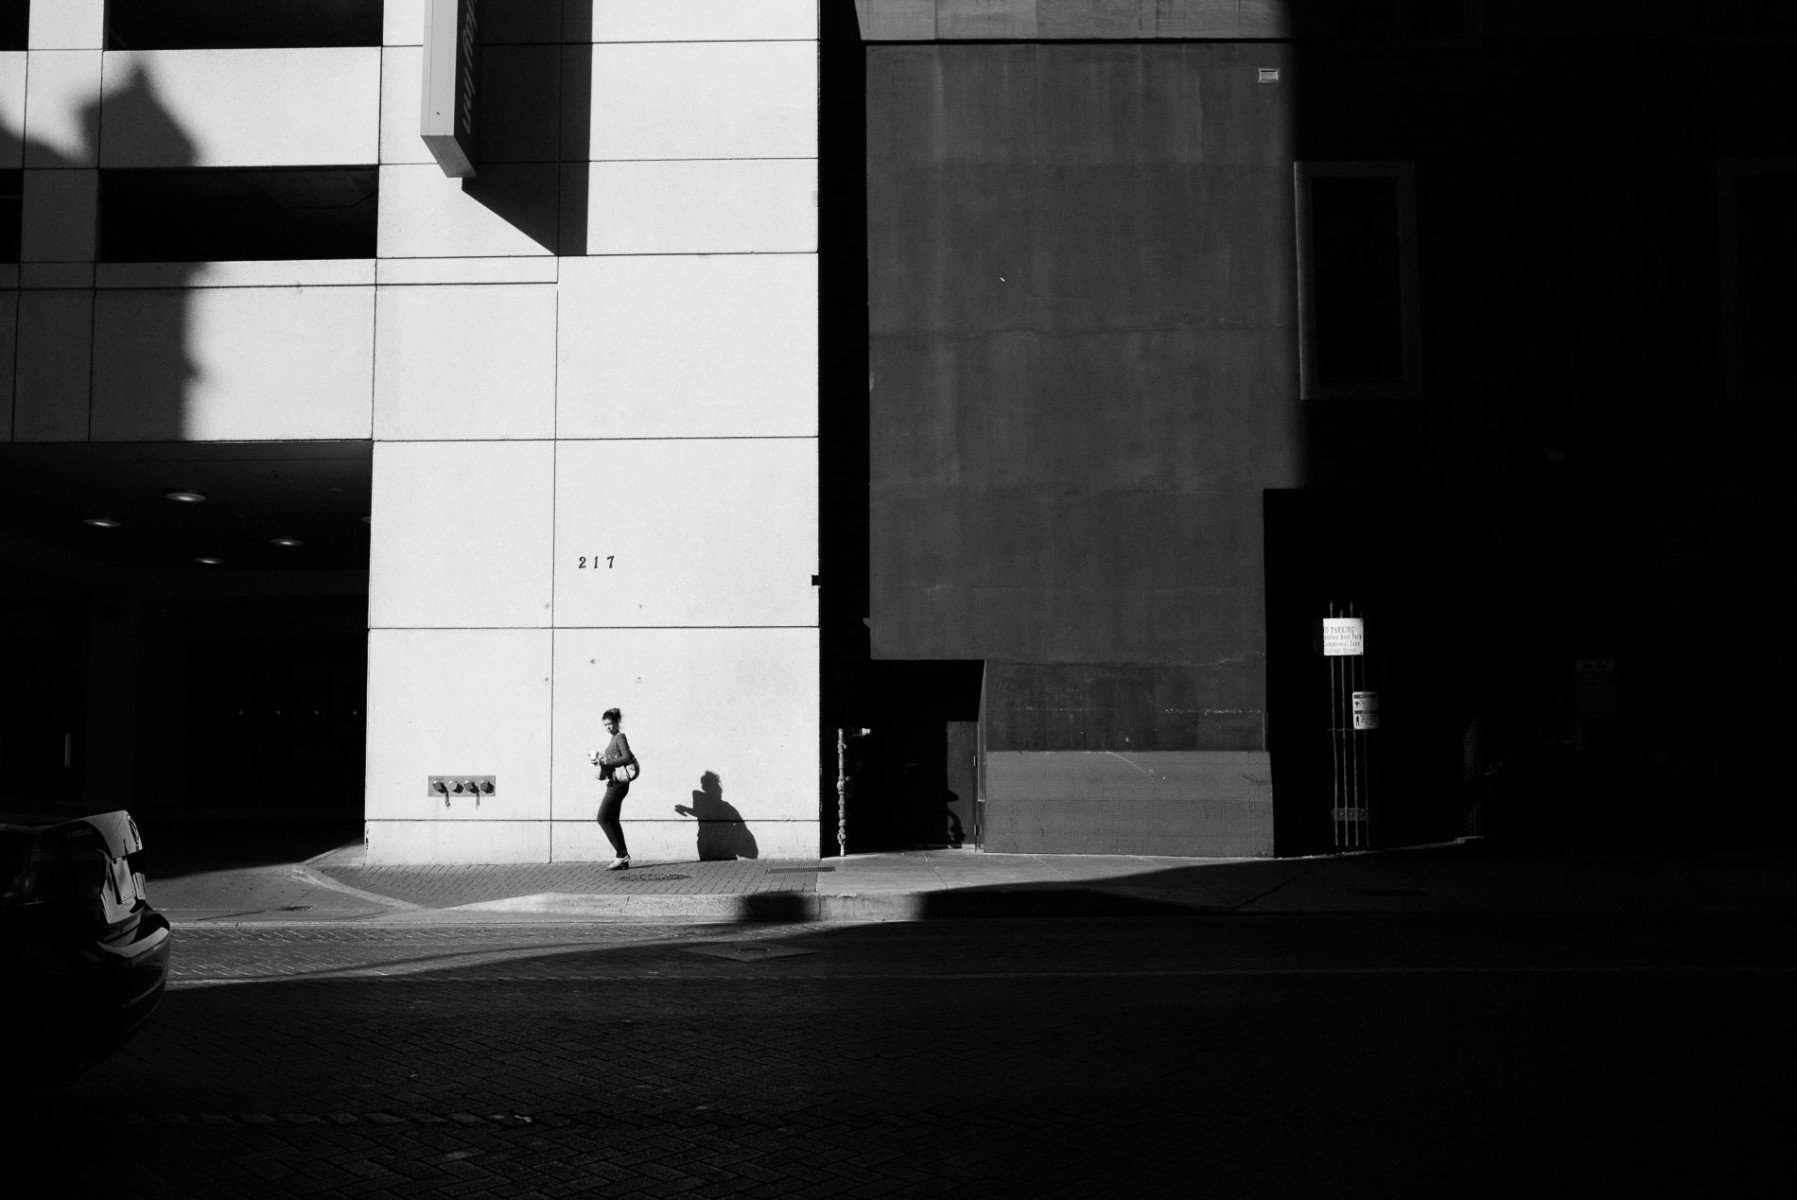 A woman walks down a street with strong shadows Leica Street Photography by PHilip Thomas